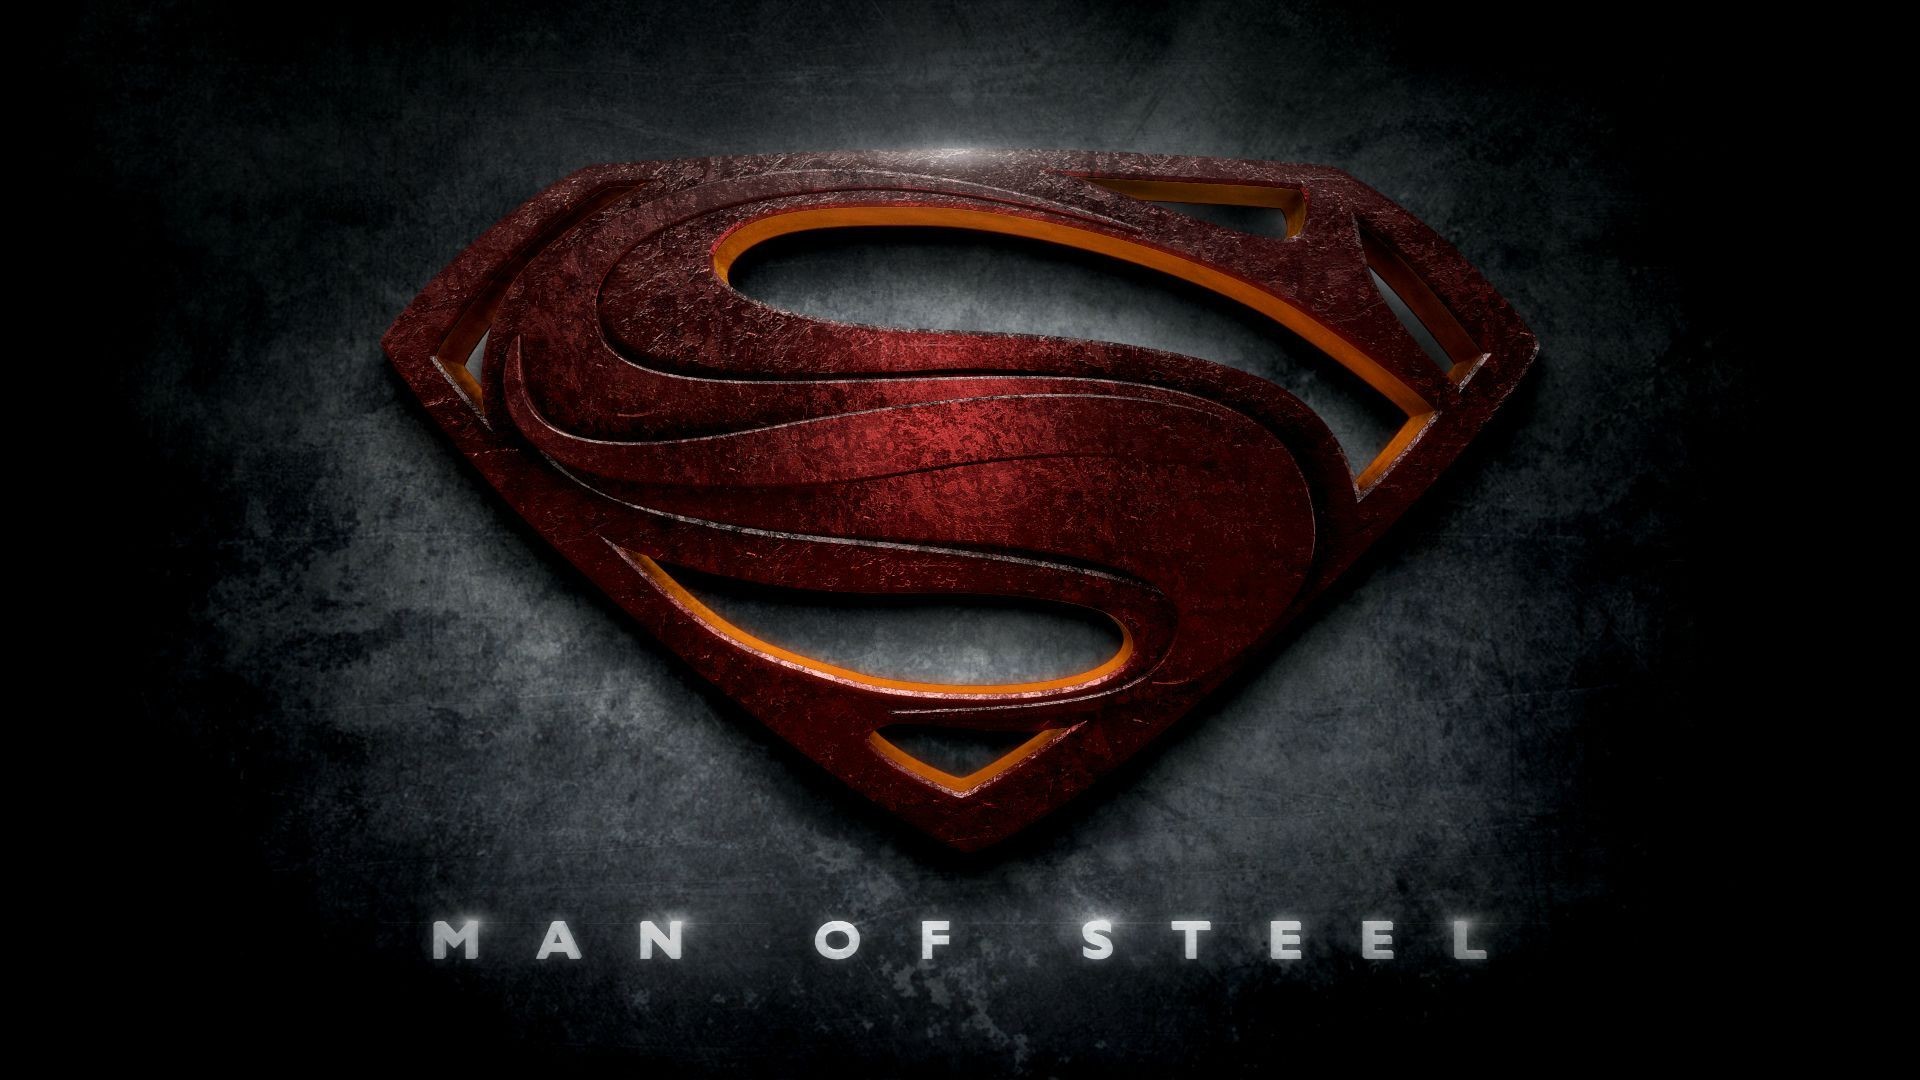 1920x1080 Superman (Justice League logos in the style of the Man of Steel movie) |  By: Dave Jones, via GeekTyrant (#superman #manofsteel)